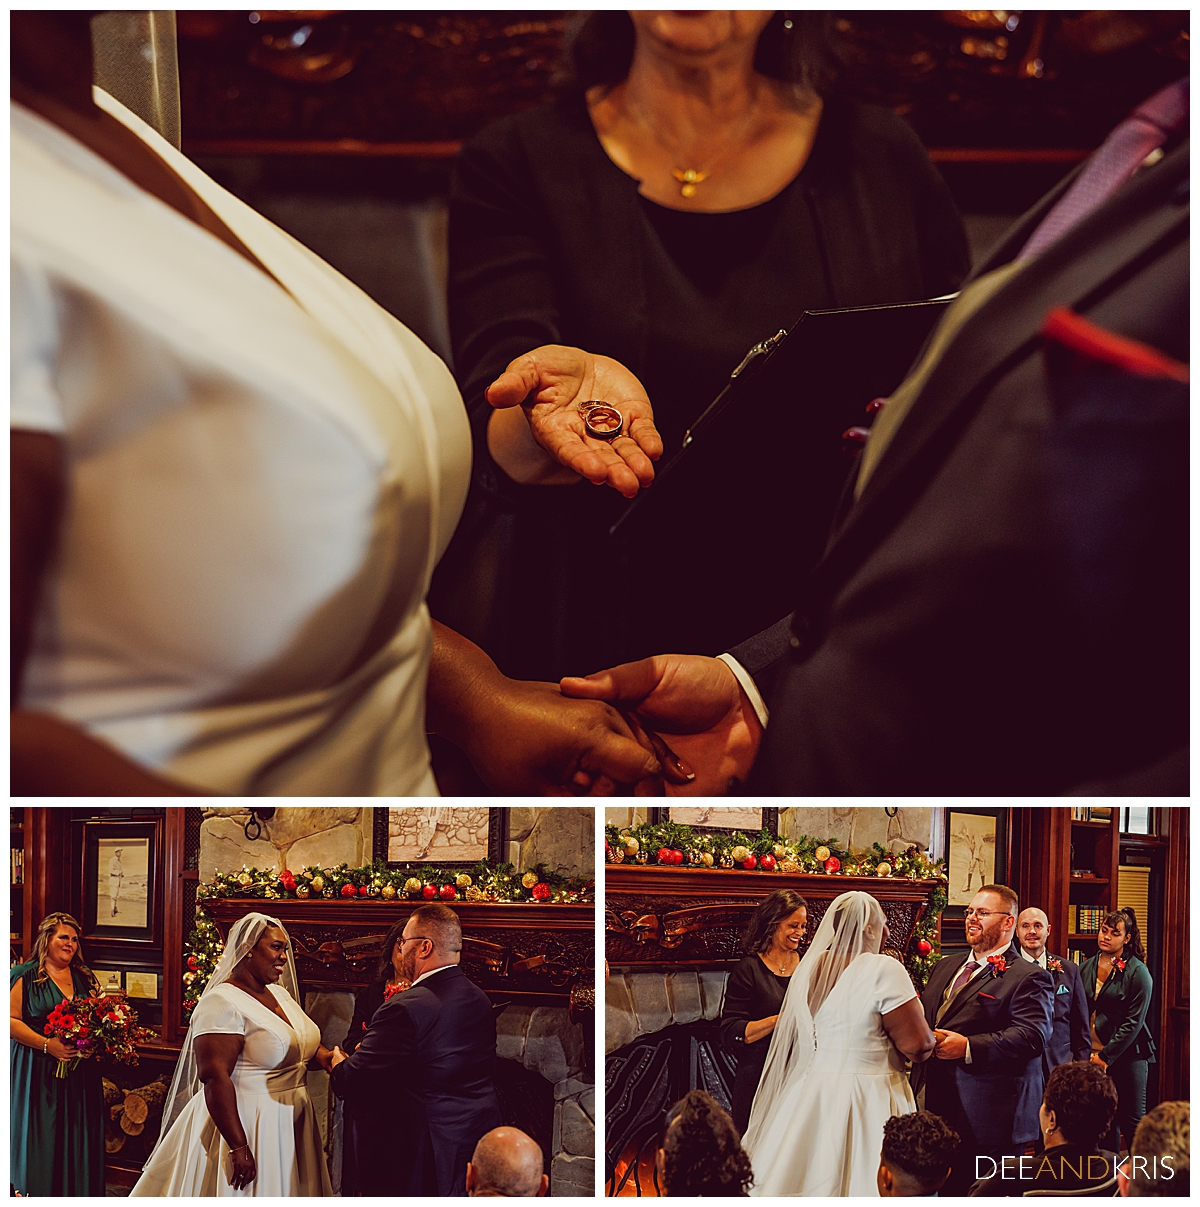 Three images: Top image of officiant blessing and holding rings out for couple. Bottom left image of groom putting ring on bride. Bottom right image of bride putting ring on groom.